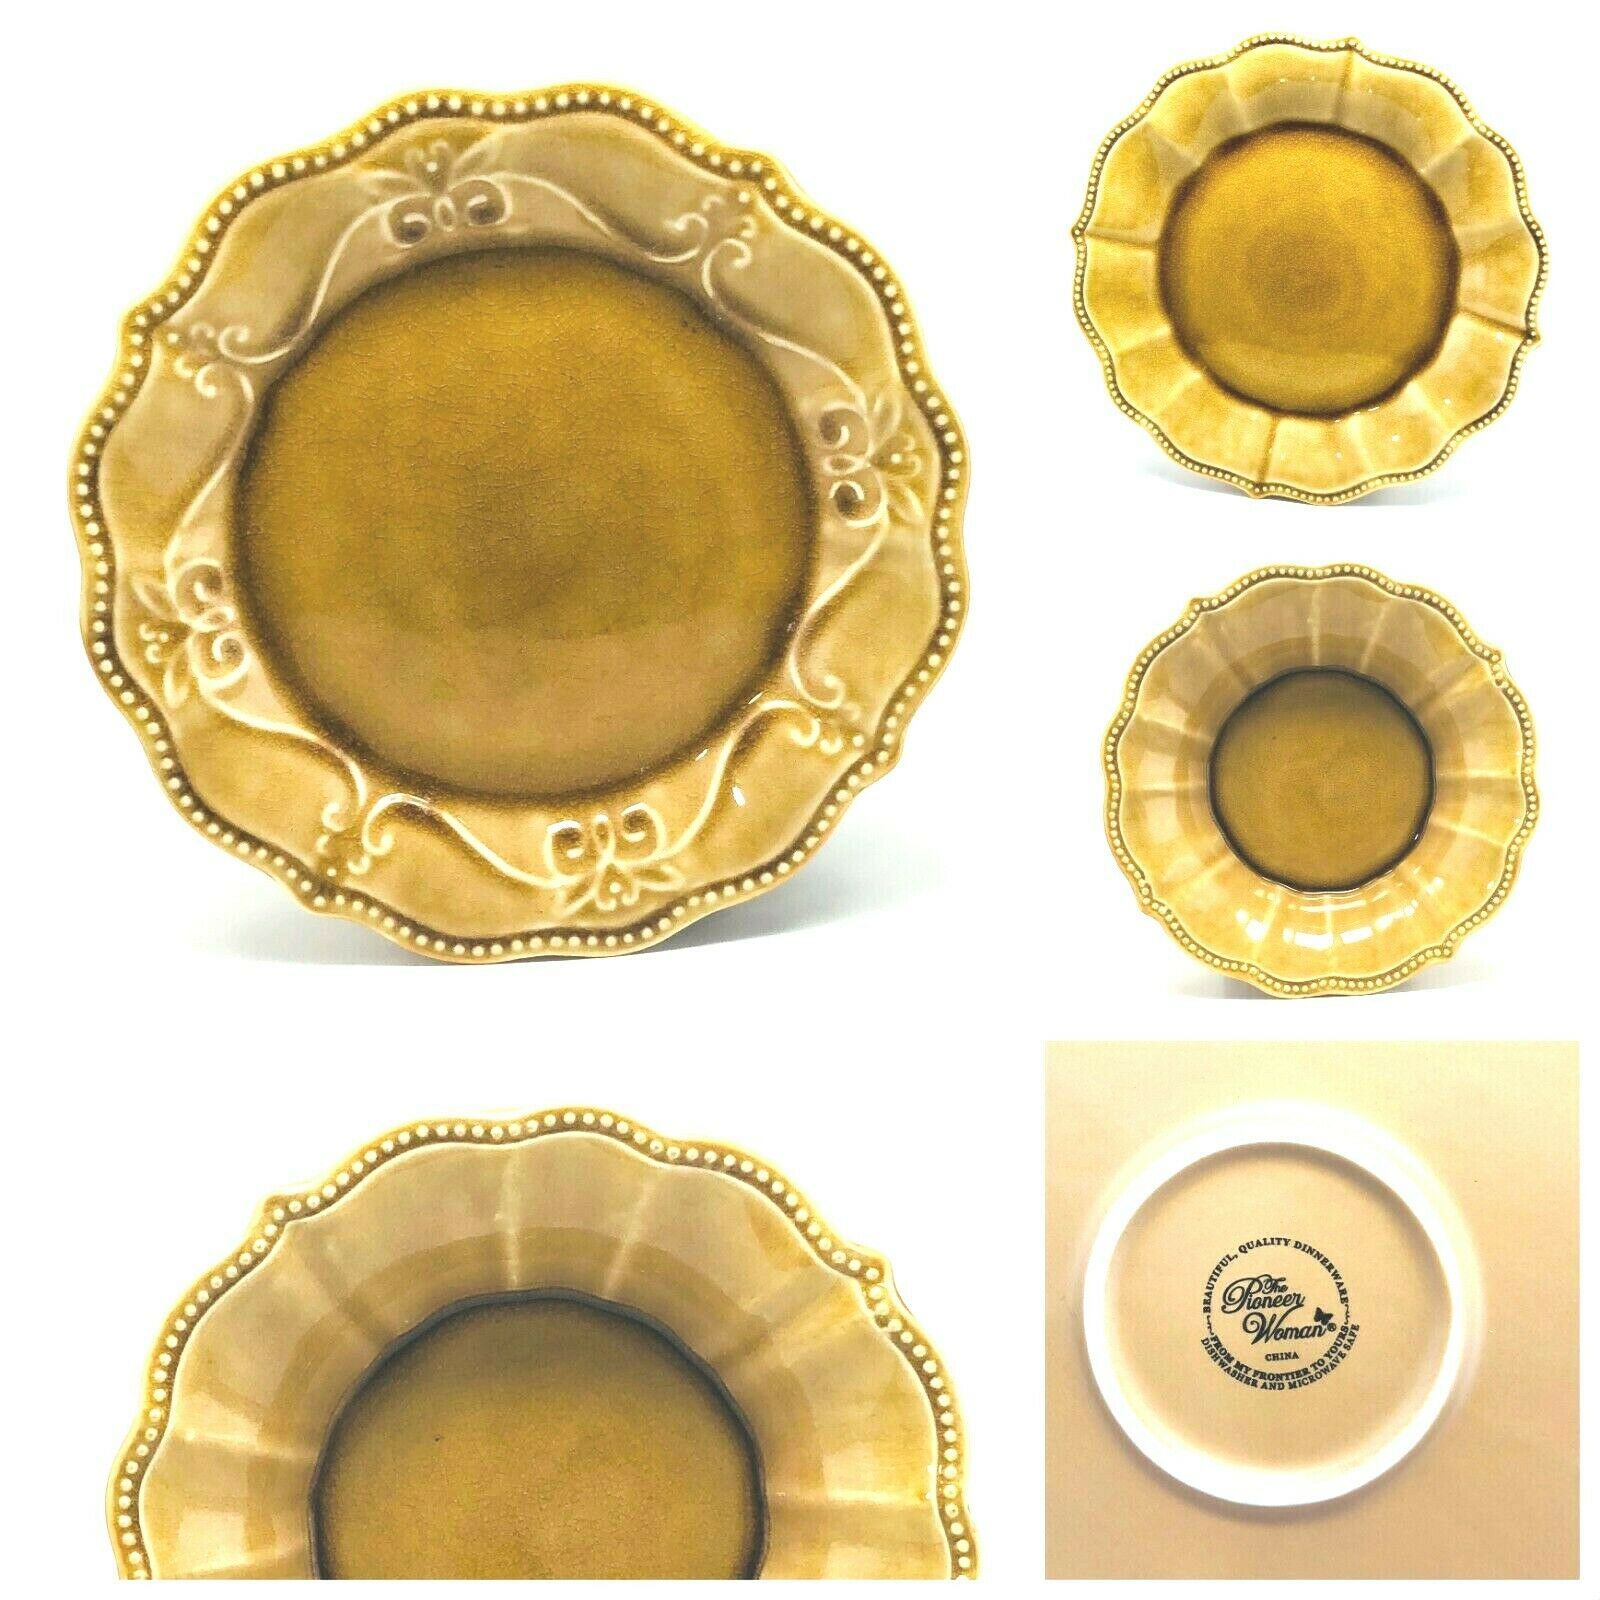 Pioneer Woman PAIGE Amber Crackle Glaze Scalloped Edge Dinnerware Collection - $9.89 - $44.55